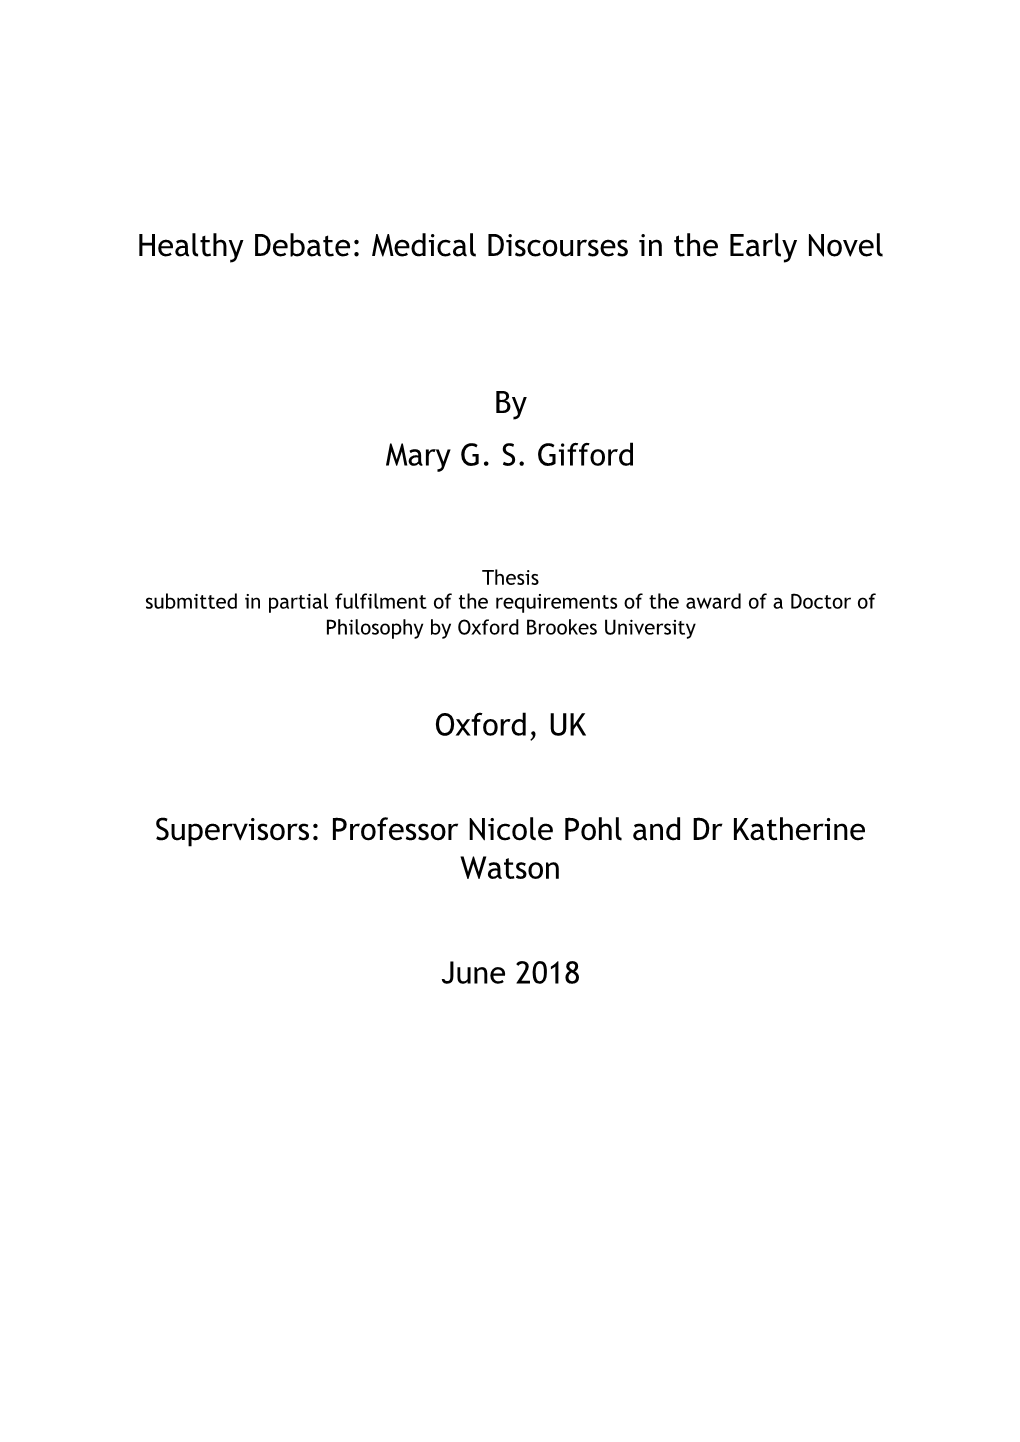 Healthy Debate: Medical Discourses in the Early Novel by Mary G. S. Gifford Oxford, UK Supervisors: Professor Nicole Pohl and Dr